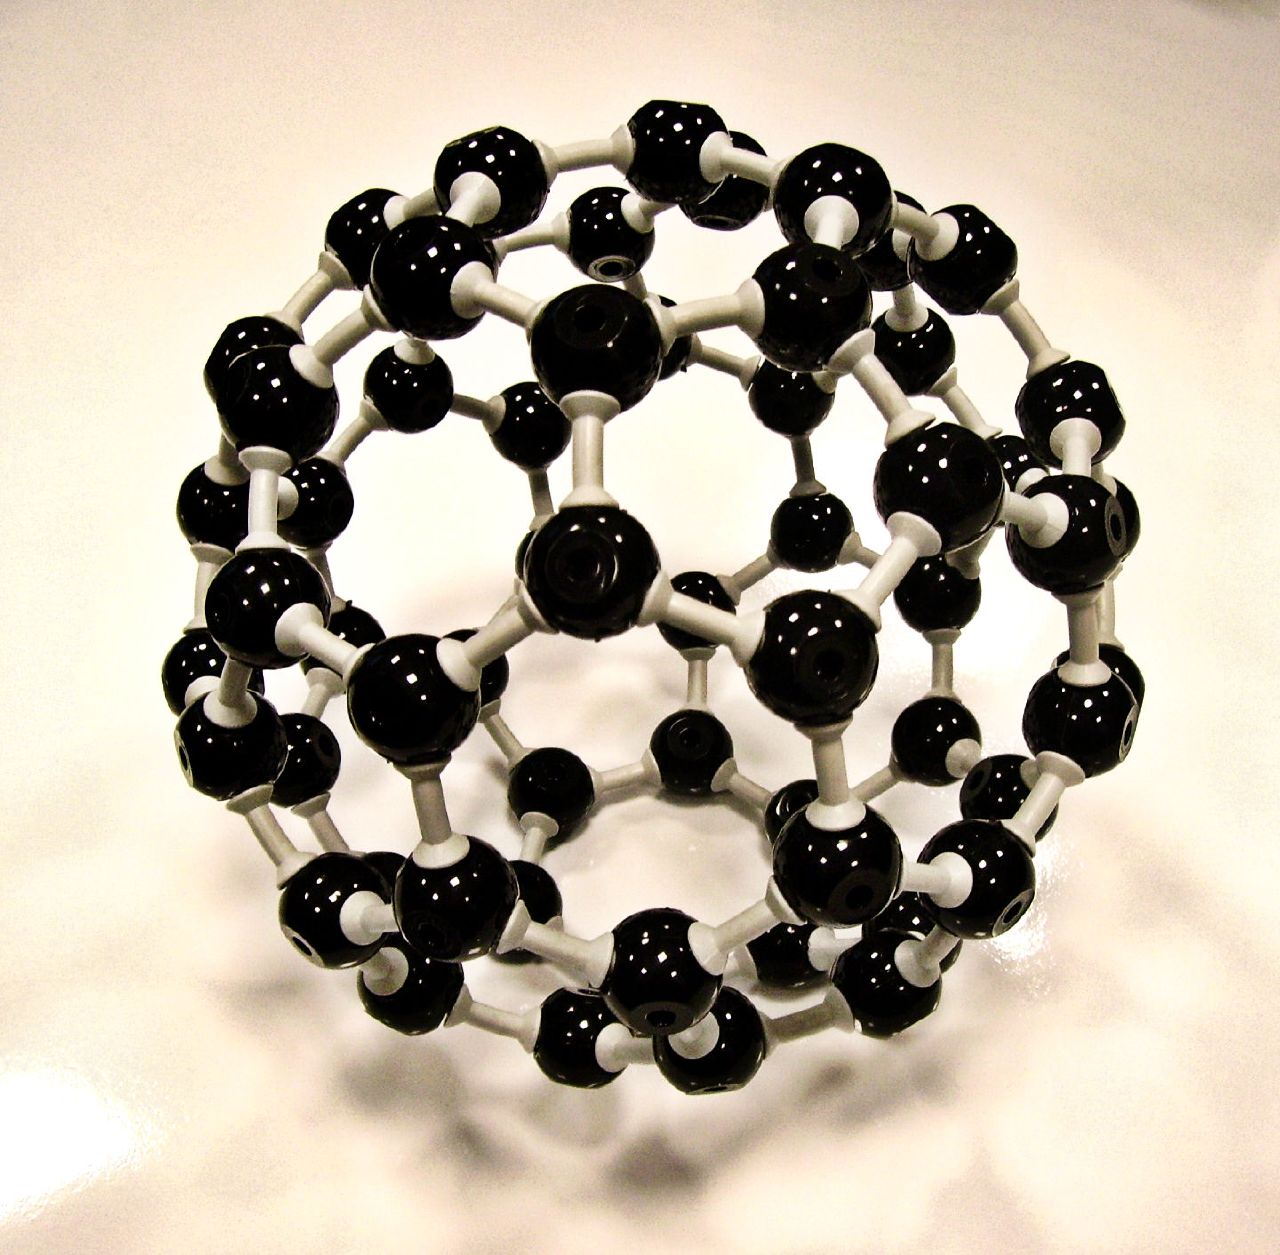 what are buckyballs used for